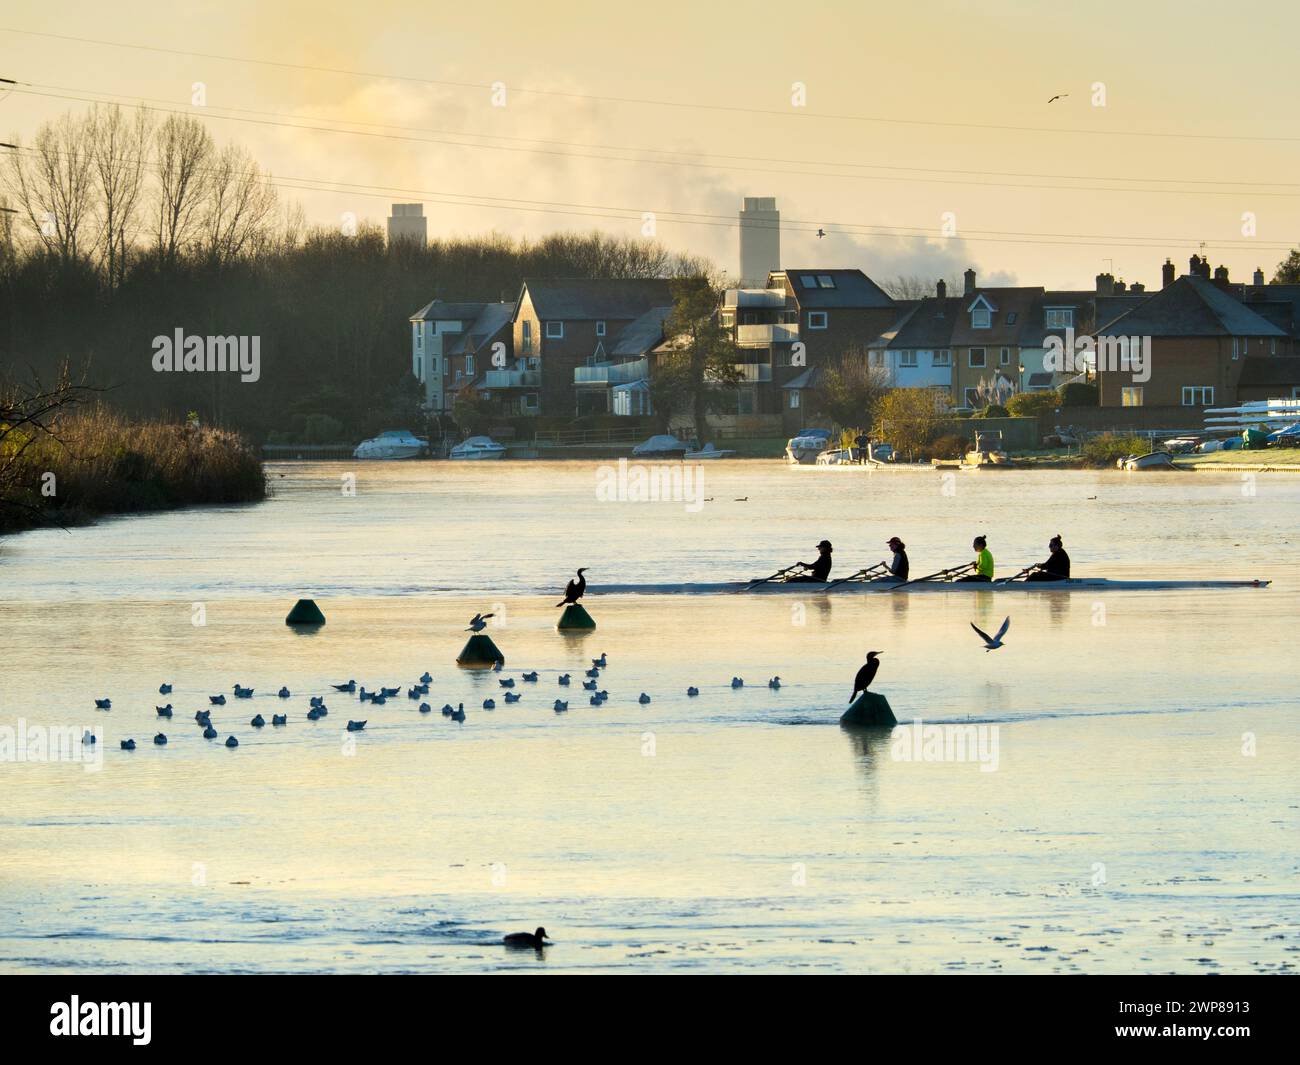 Abingdon-on-Thames claims to be the oldest town in England.It is only a few miles downstream from Oxford, so we often see college rowing teams practic Stock Photo